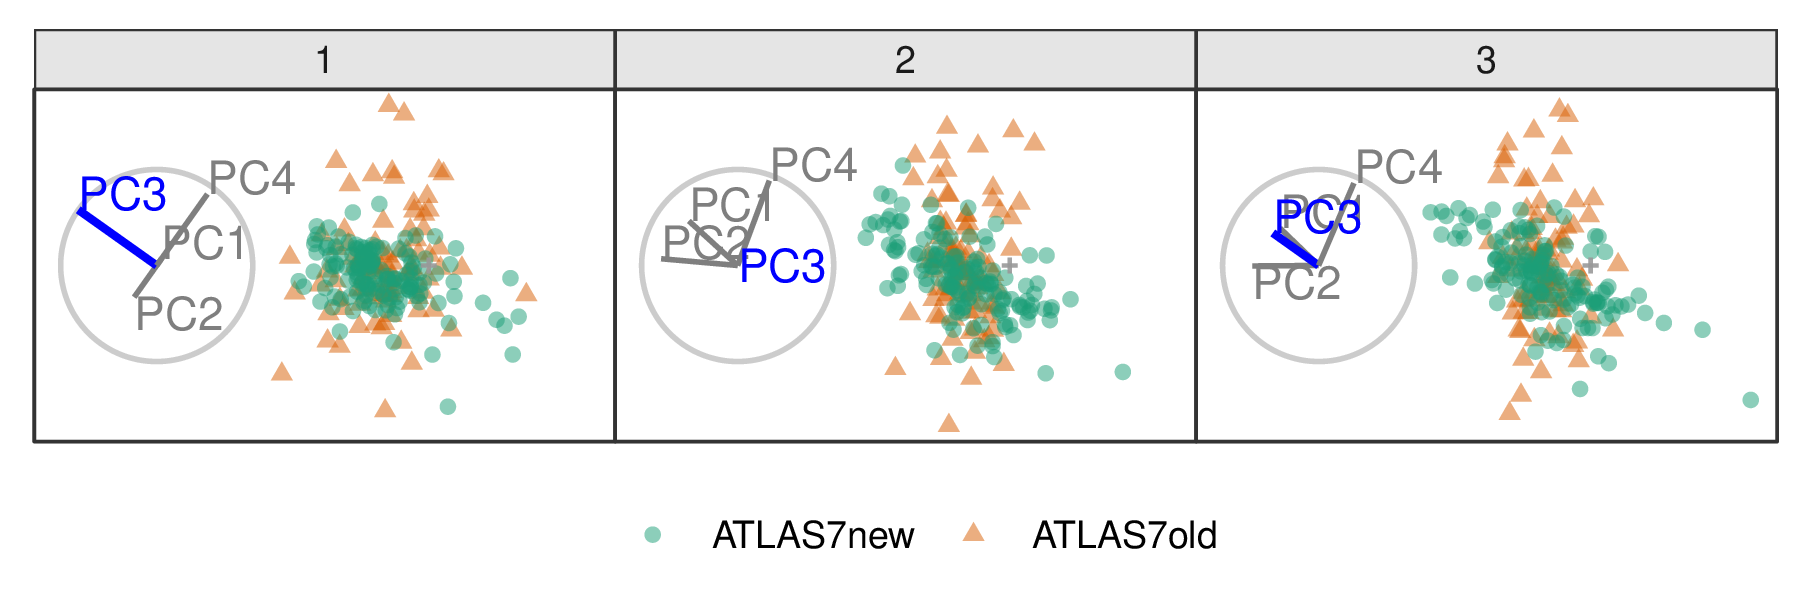 Frames from the radial tour manipulating PC3 within the jet cluster, with color indicating experiment type: ATLAS7new (green) and ATLAS7old (orange).  When the contribution from PC3 is changed, there is little change in the separation of the clusters, suggesting that PC3 is not important for distinguishing the experiments.